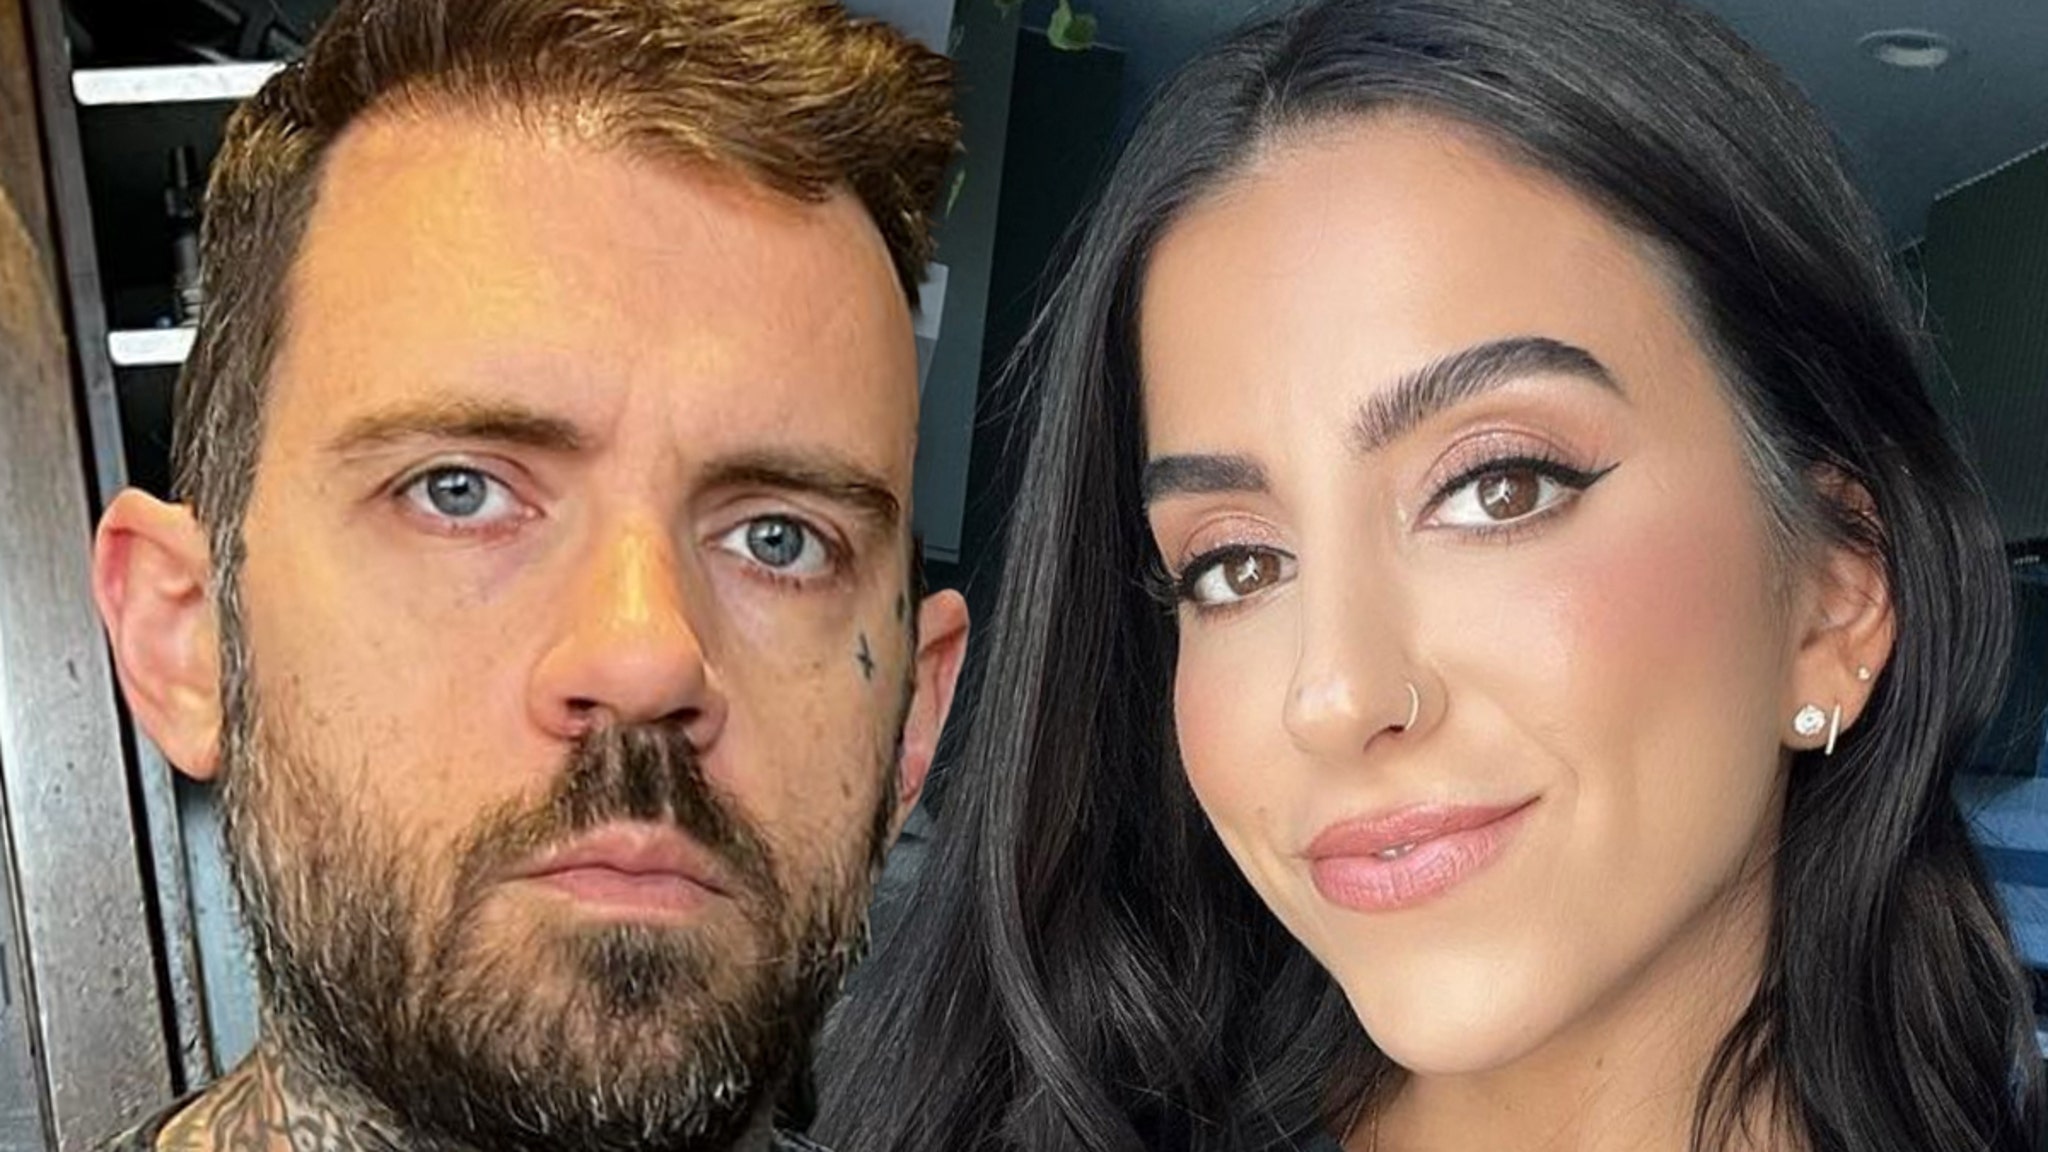 YouTuber Adam22 Fine With Wifes Pornstar Career After Getting Married